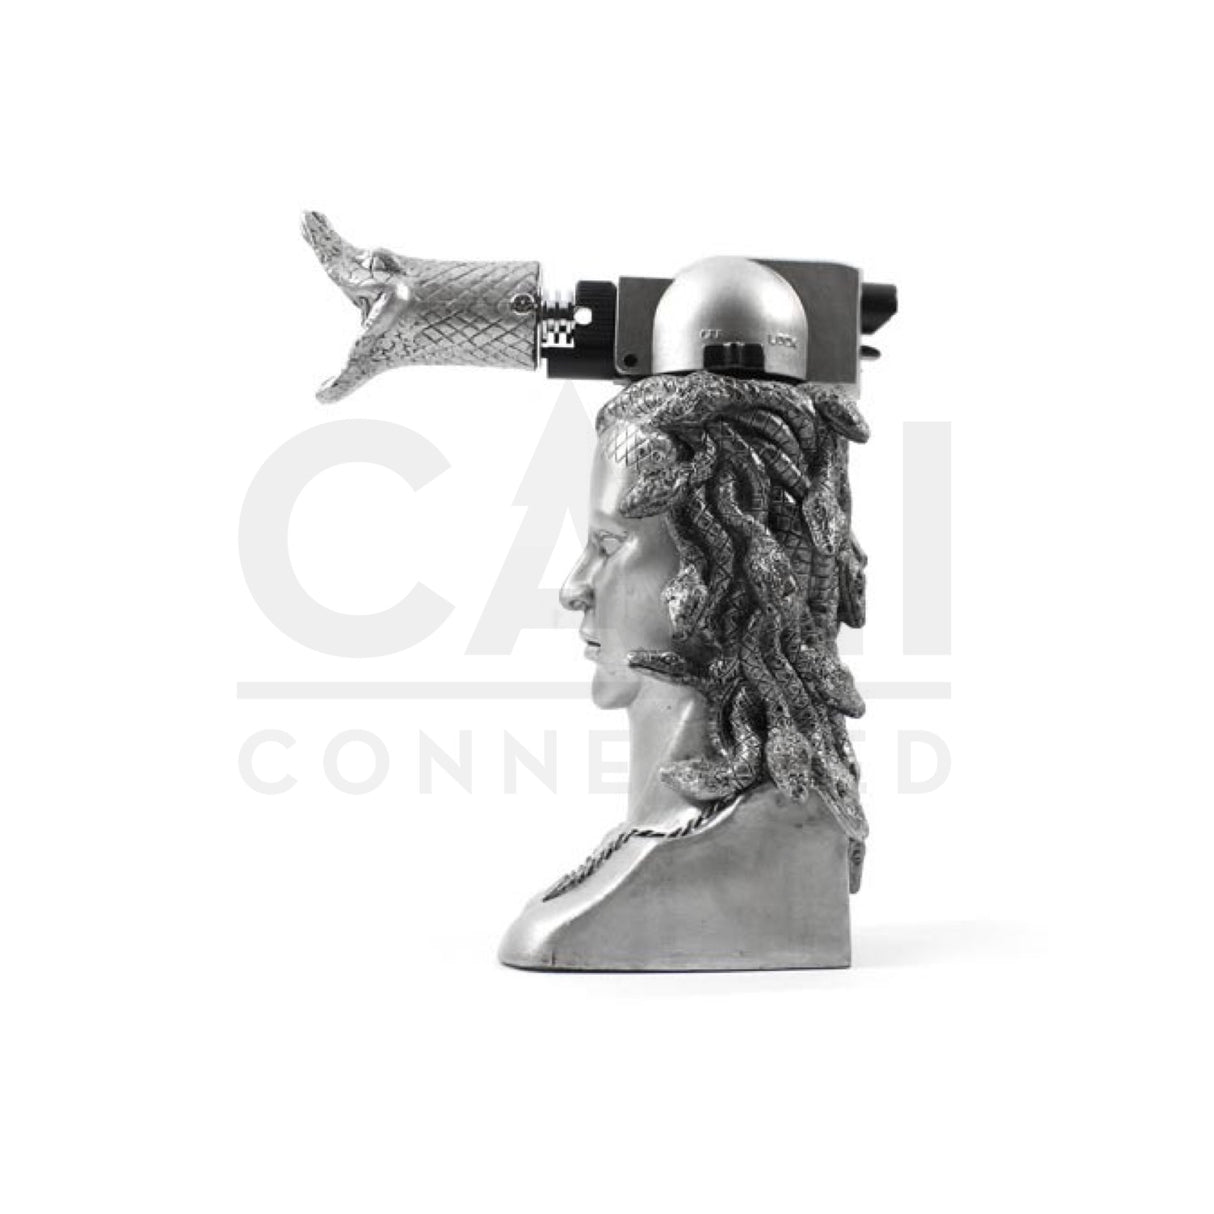 Newport Medusa Series Torch Lighter 🔥 - CaliConnected